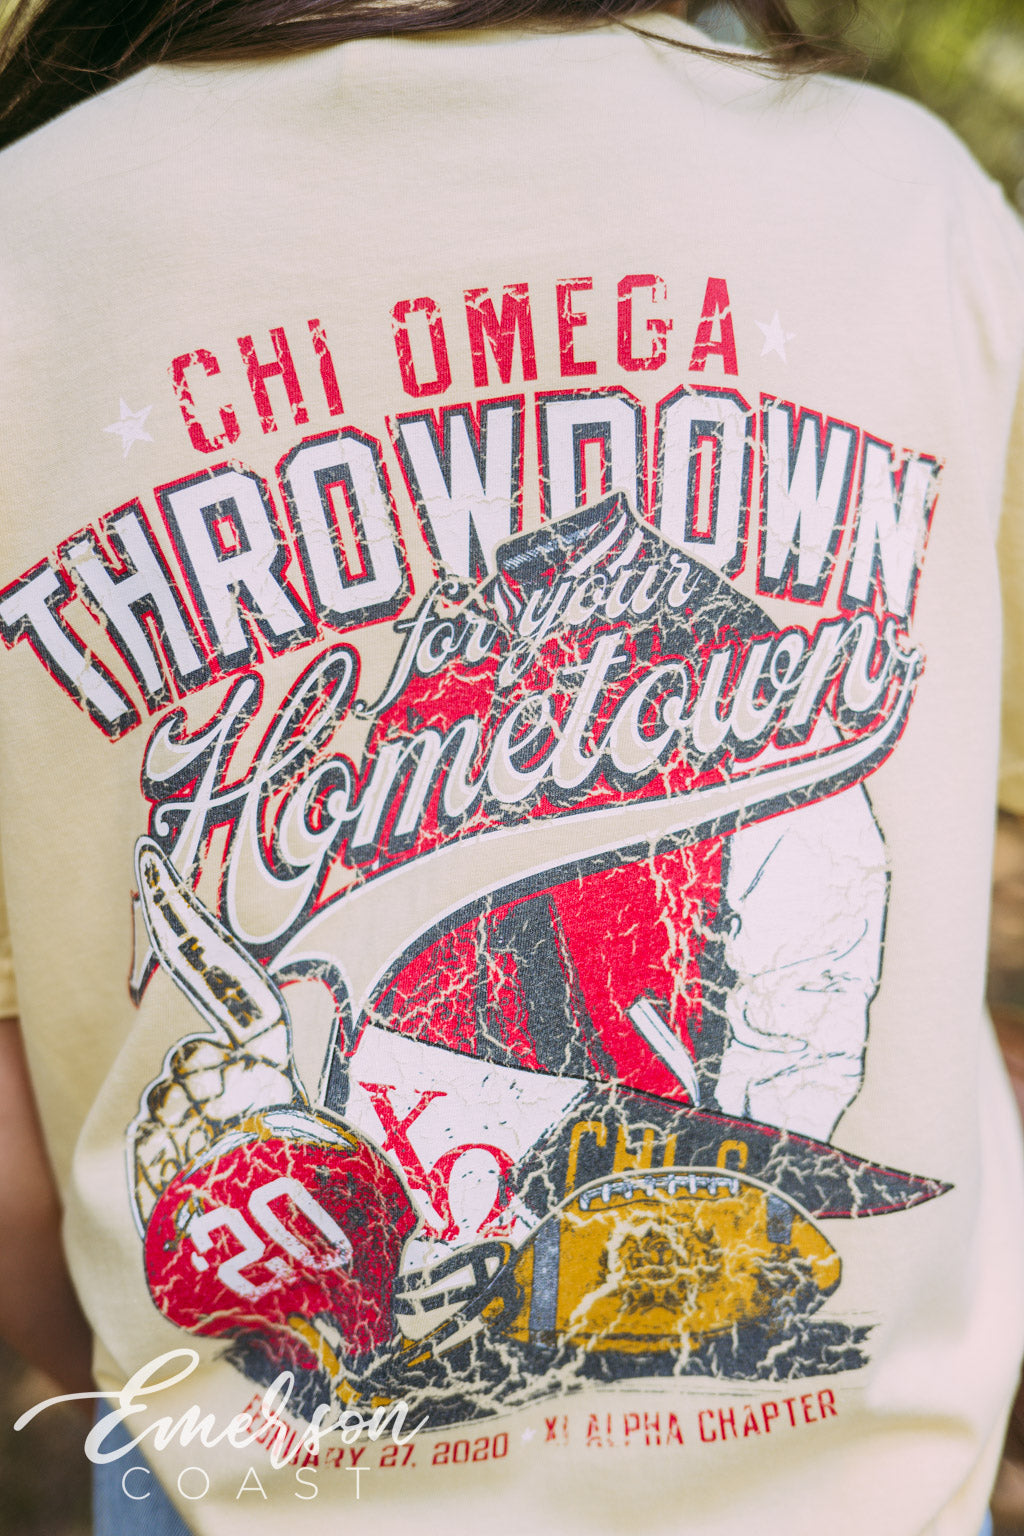 Chi Omega Throwdown for Your Hometown